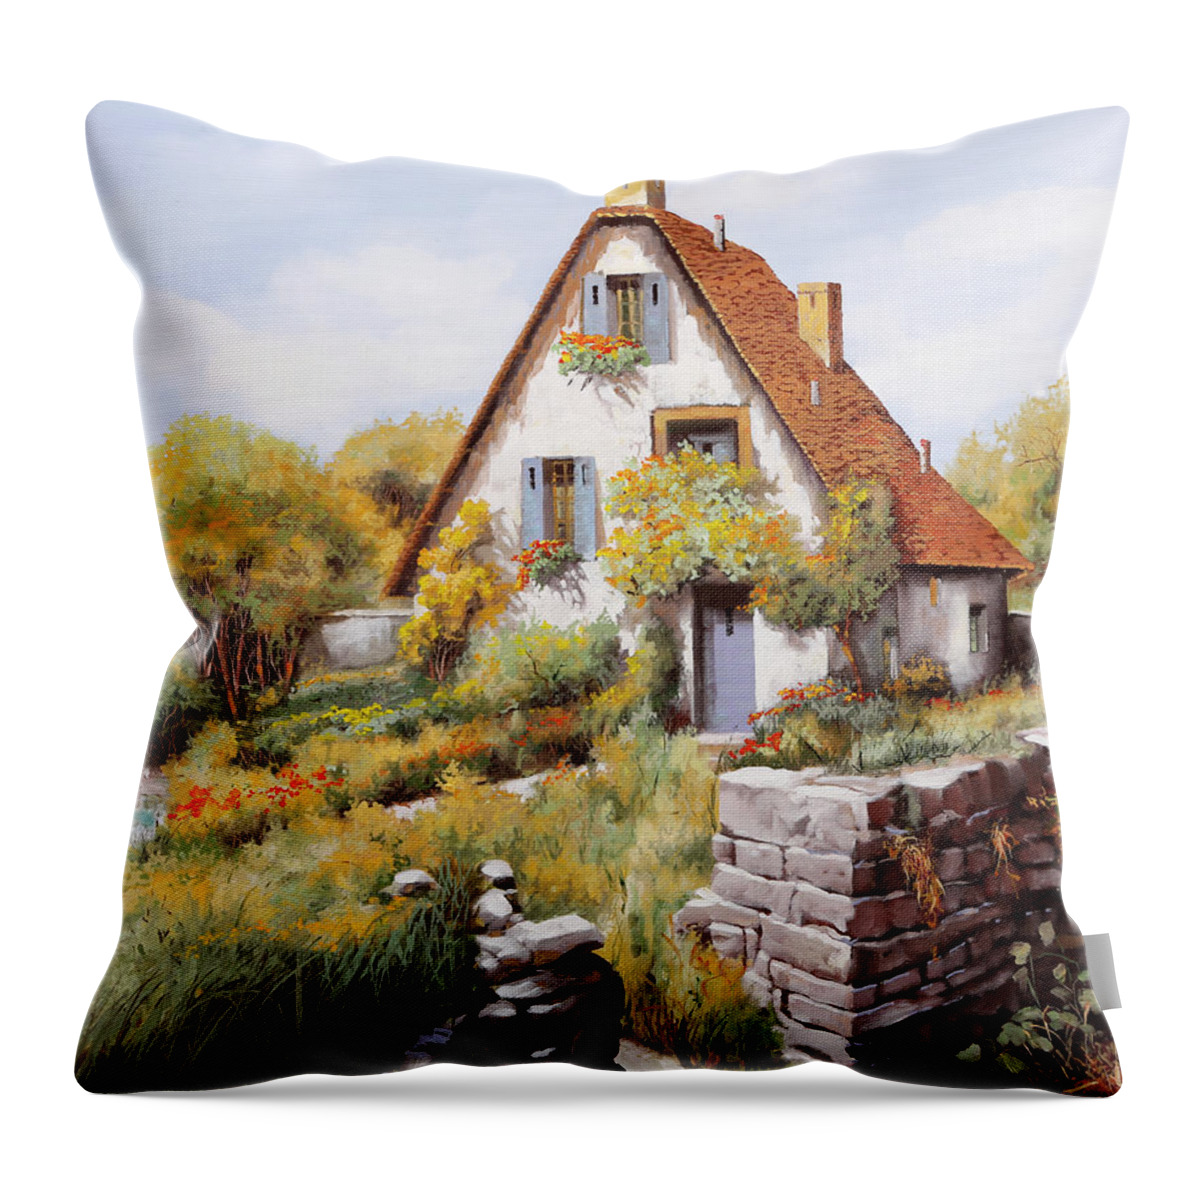 Cottage Throw Pillow featuring the painting Cottage by Guido Borelli